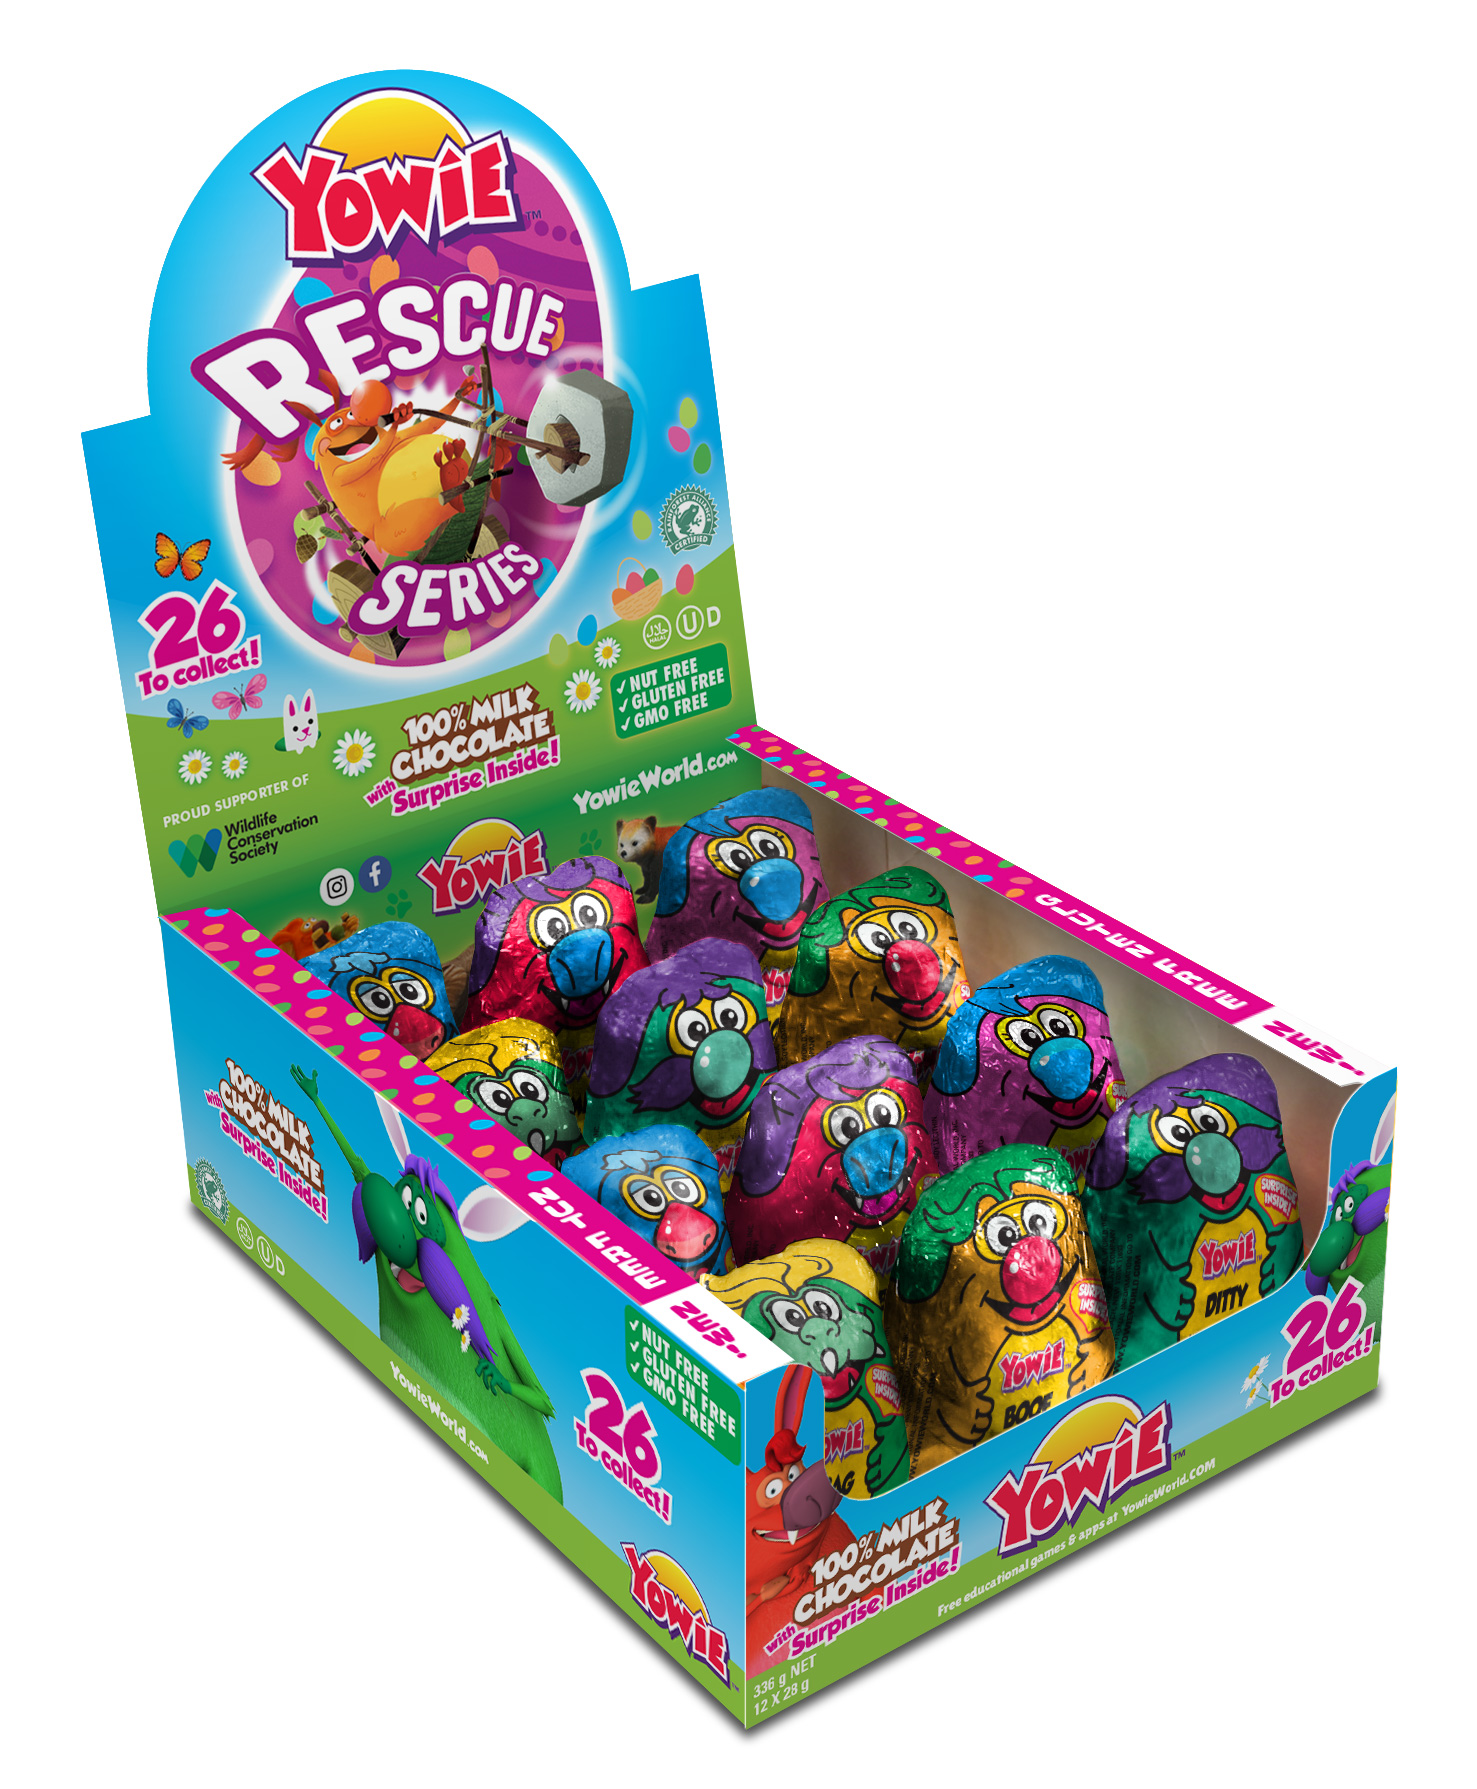 Yowie chocolates expands across the US with plans for Australia, New Zealand & Asia